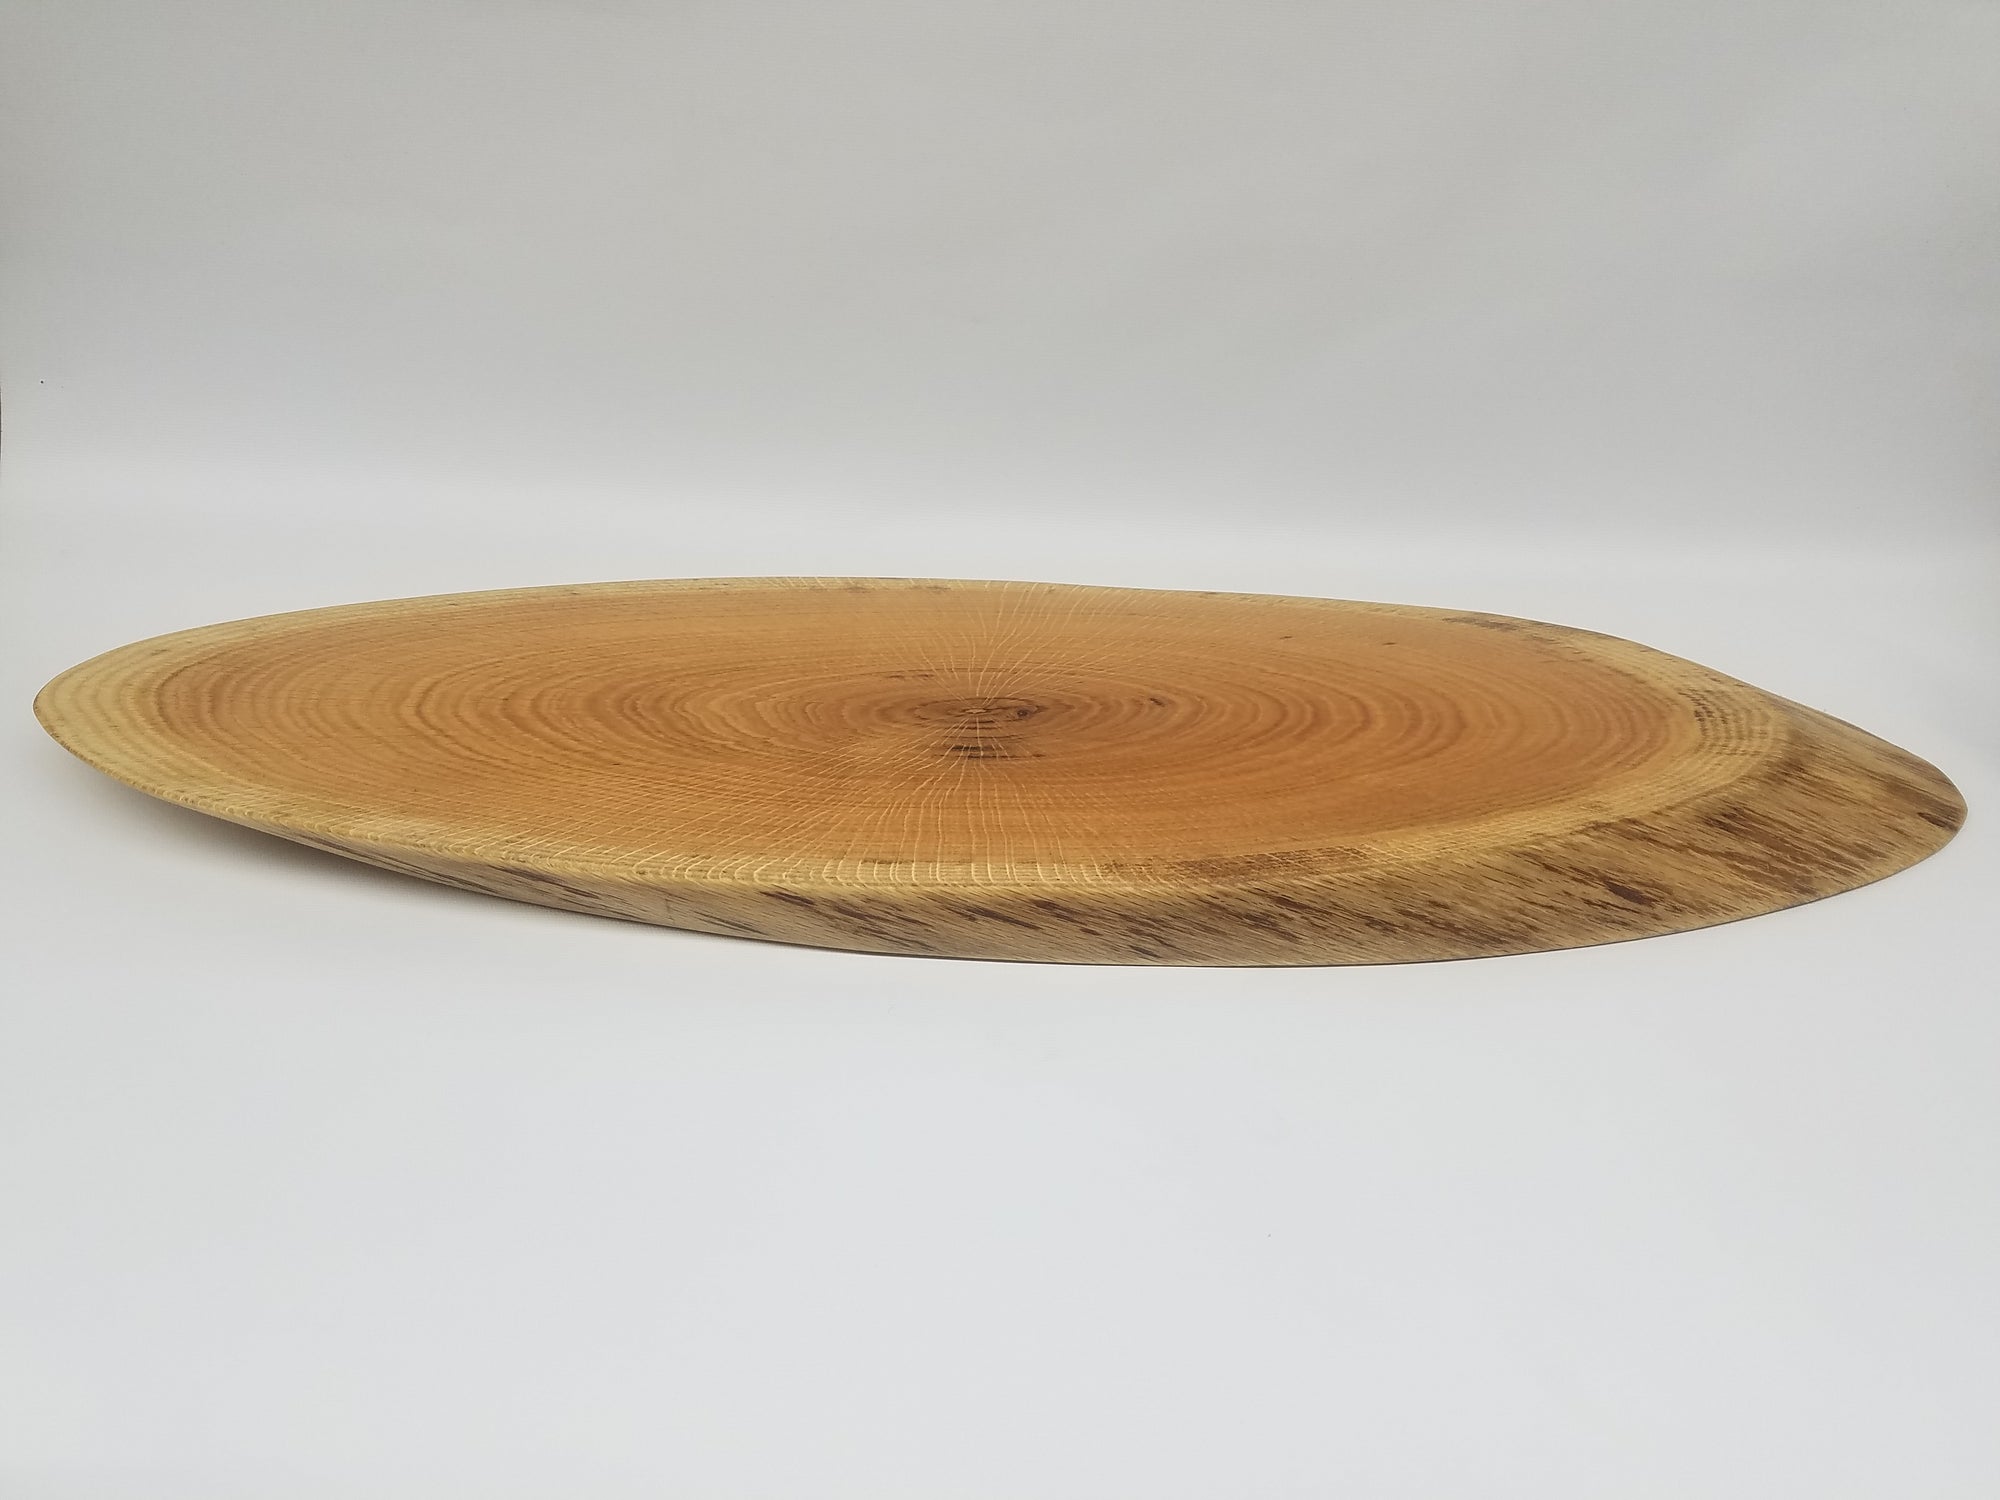 Large Wooden Serving Platter- Charcuterie Board- Table Centerpiece- Long and Narrow- Natural Wood- Serving Board- Food Safe- Live Edge Slab